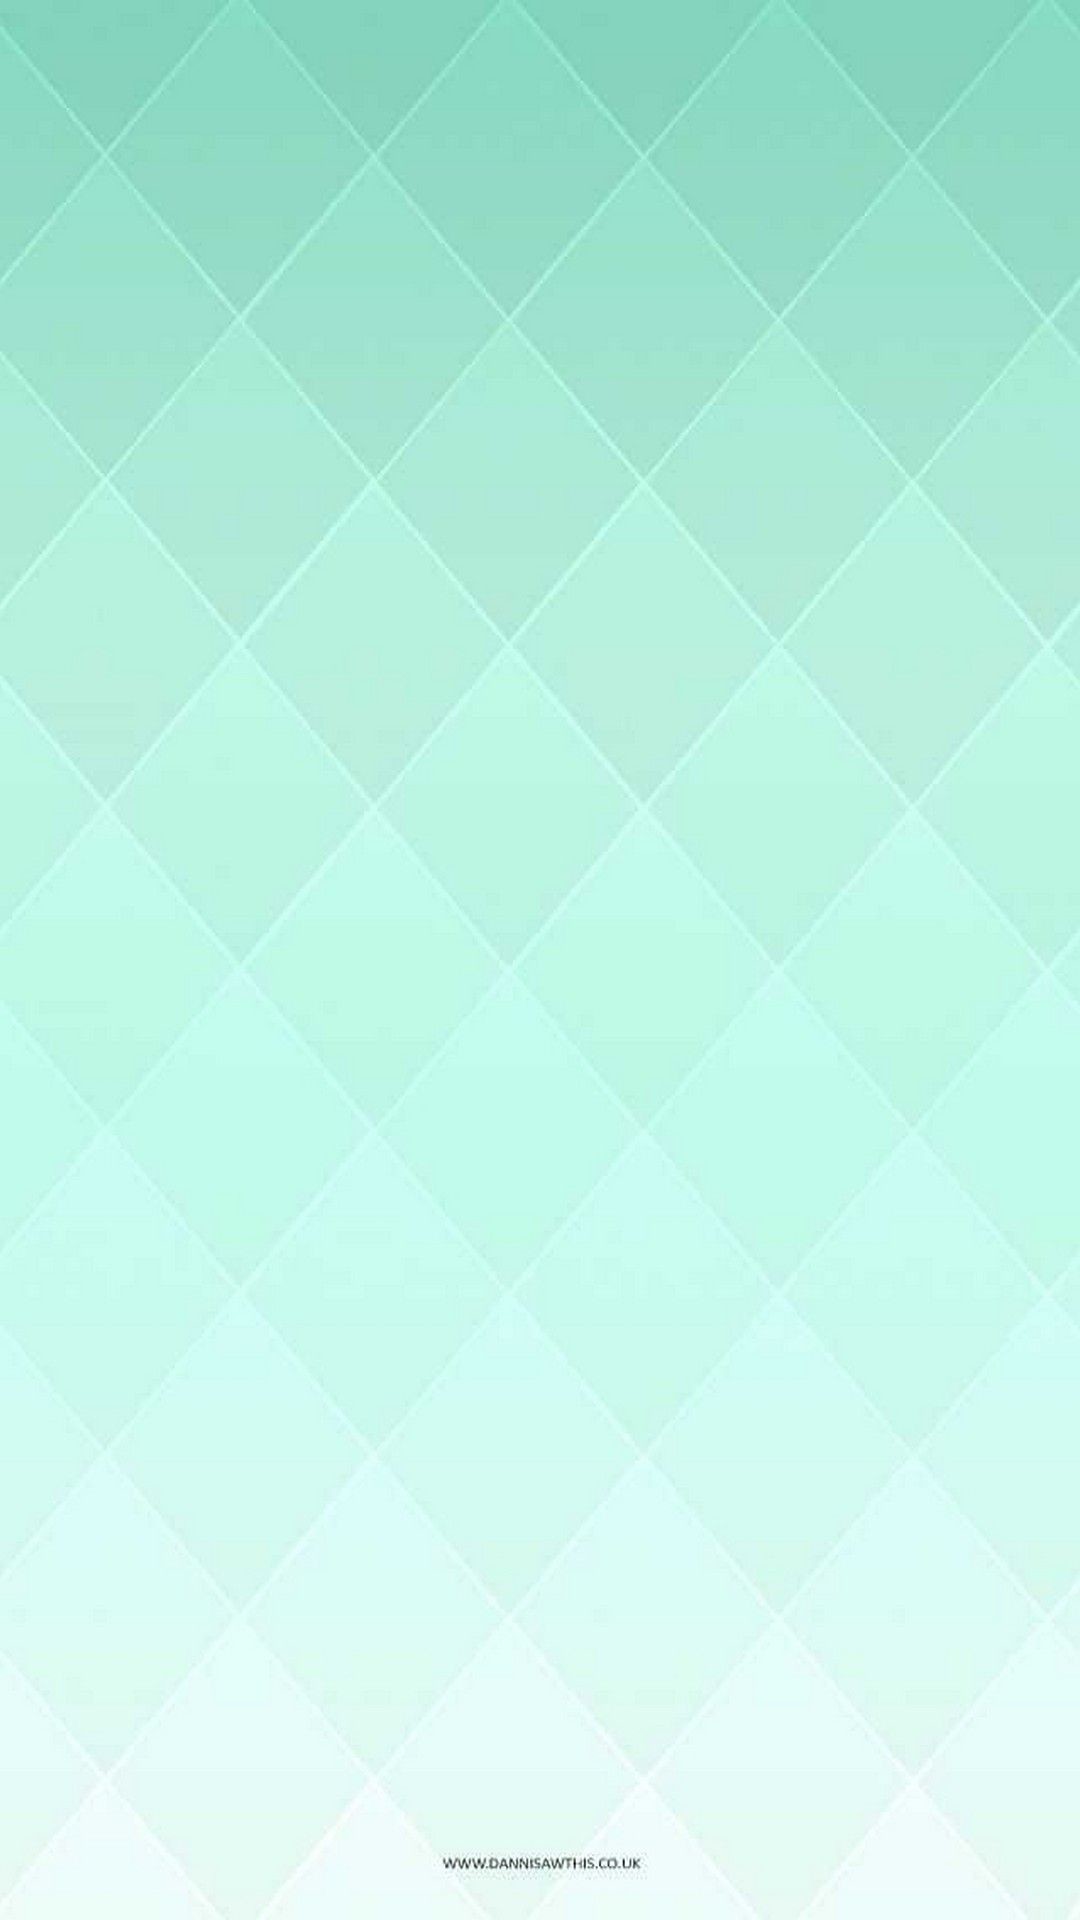 1080x1920 Android Wallpaper HD Mint Green - Best Mobile Wallpaper